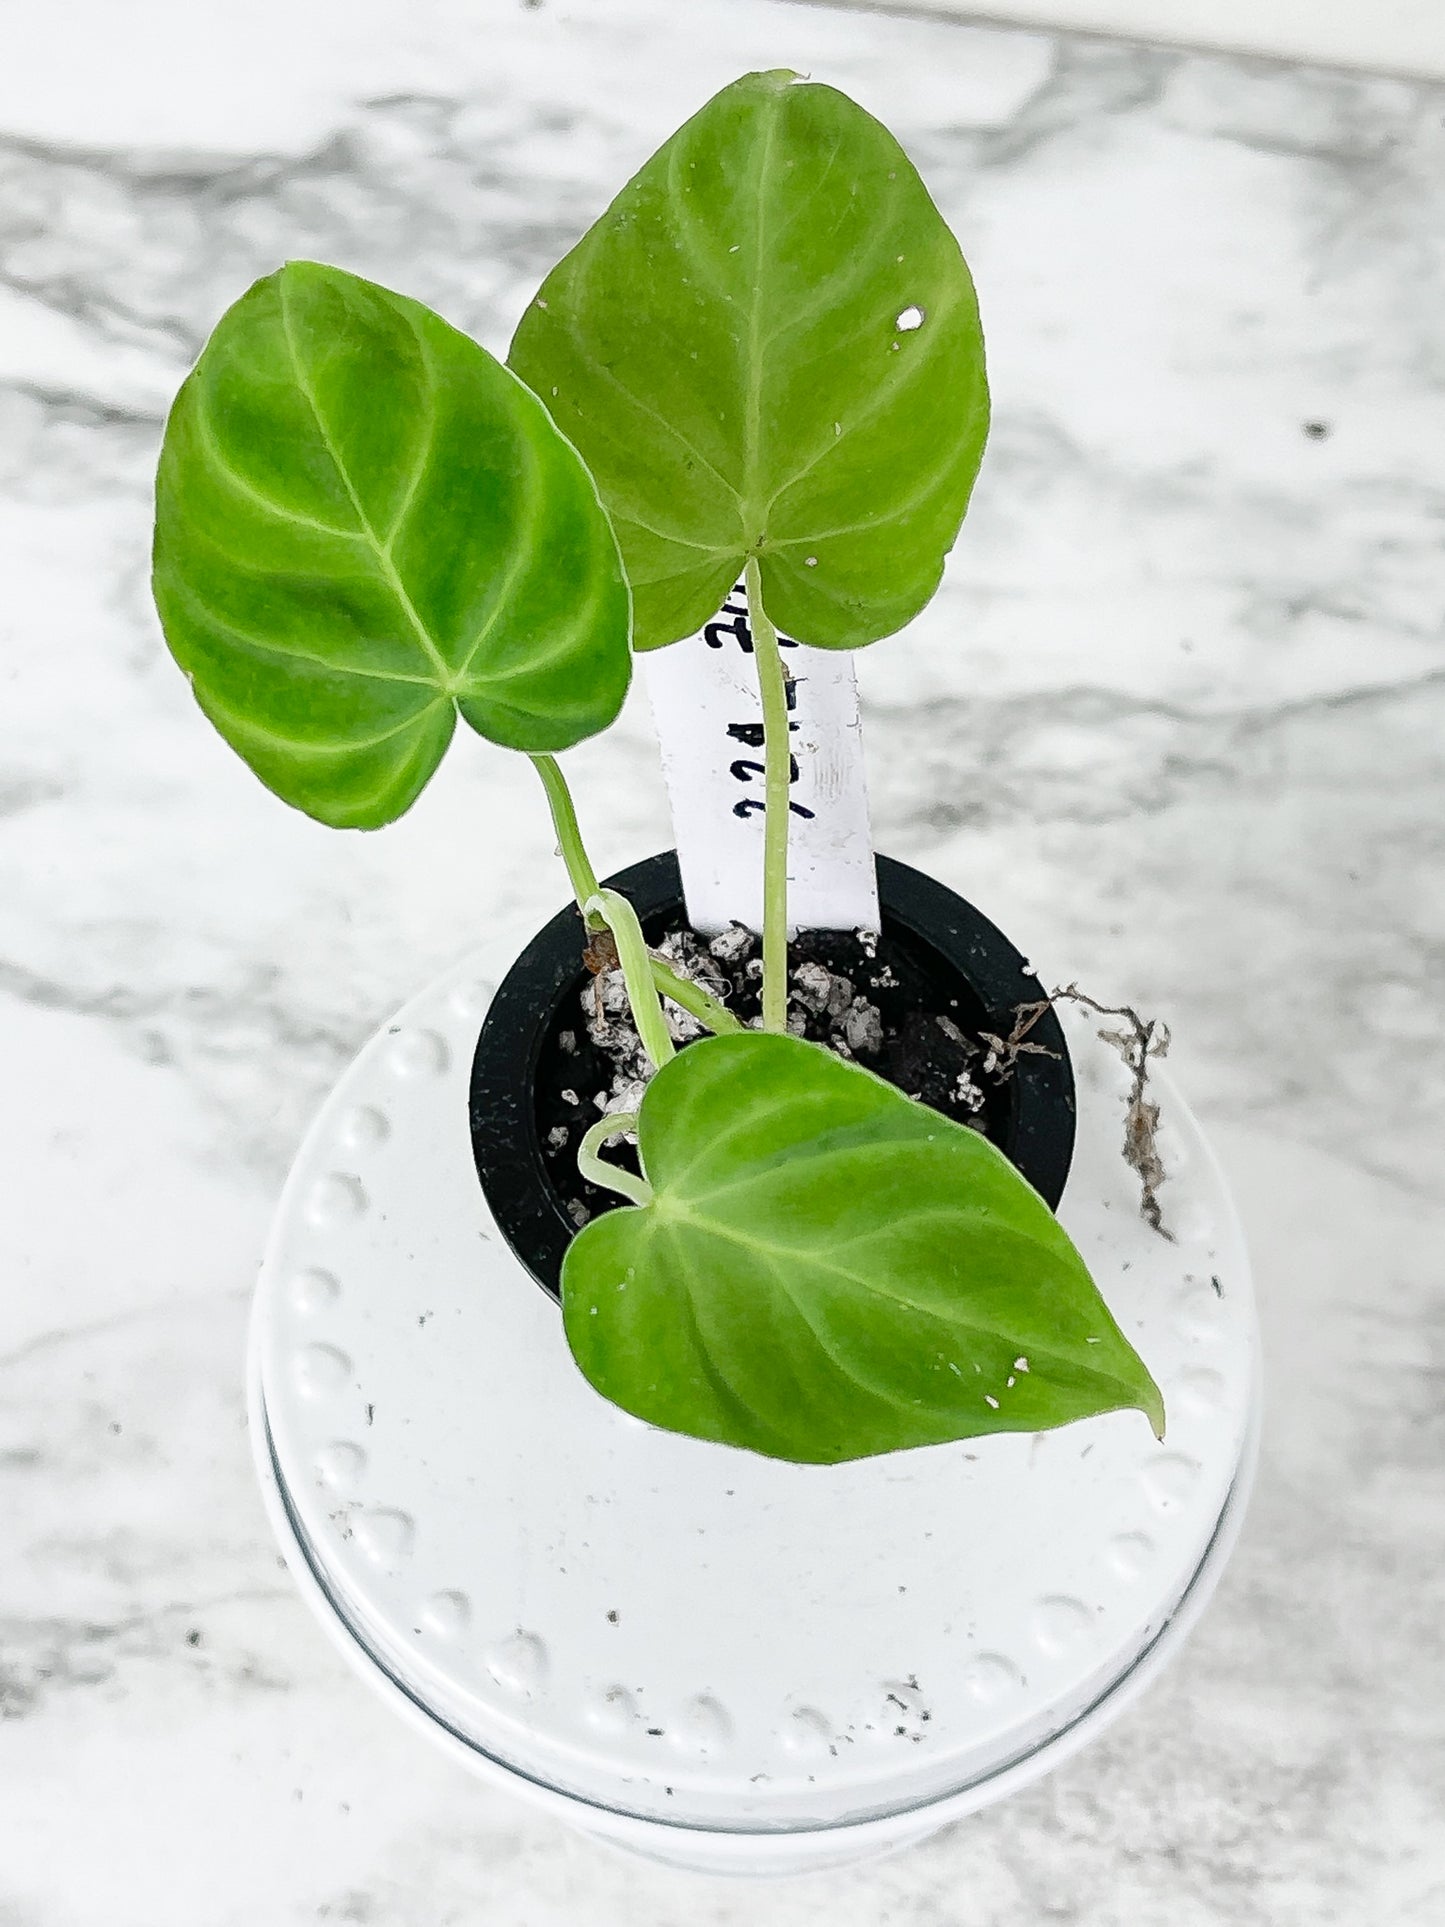 Philodendron Verrucosum Seedling Rooted. 4 leaves